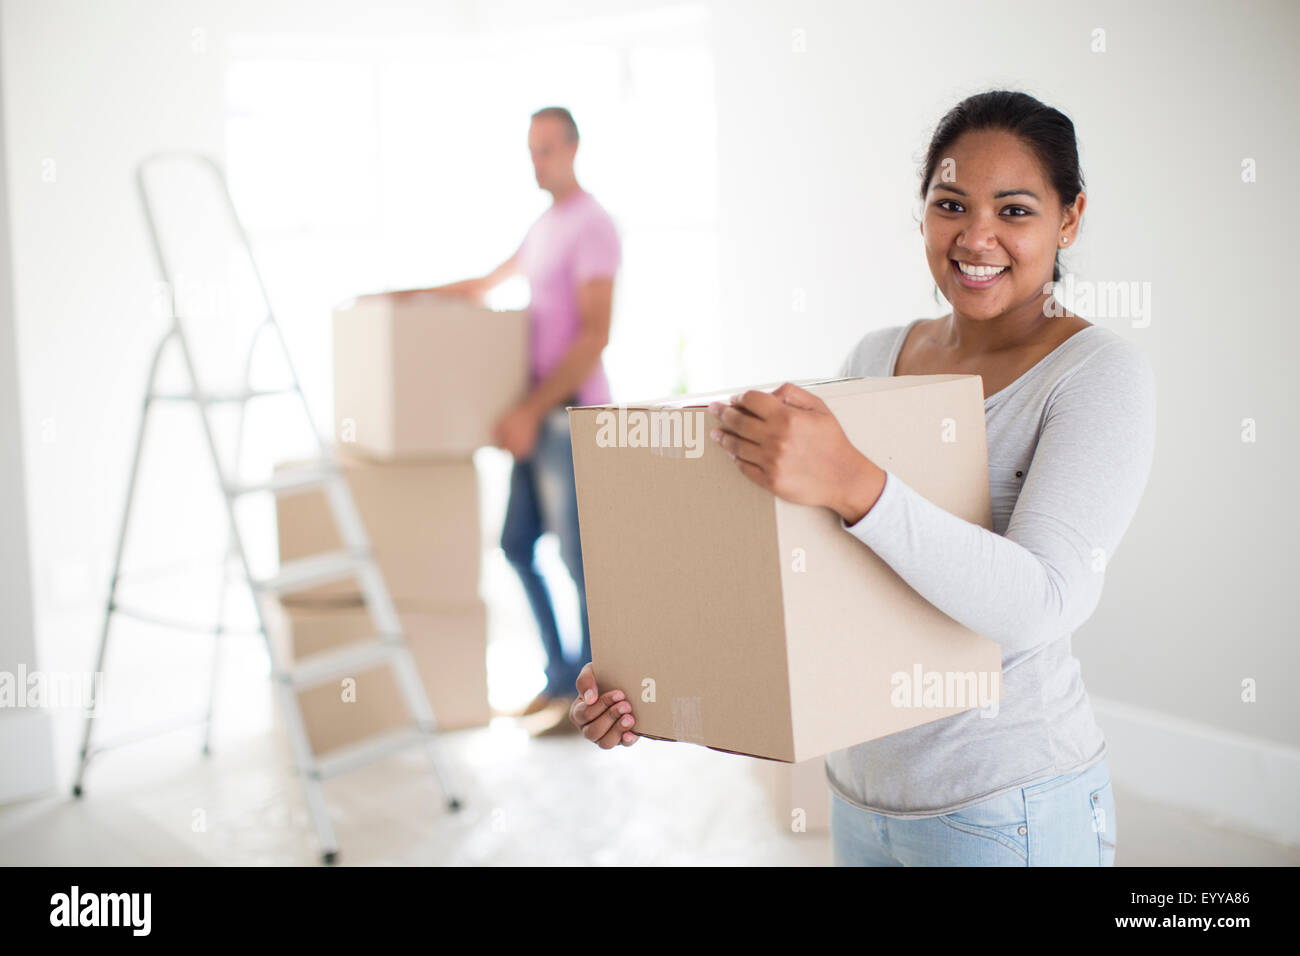 Couple holding cardboard boxes in new home Stock Photo